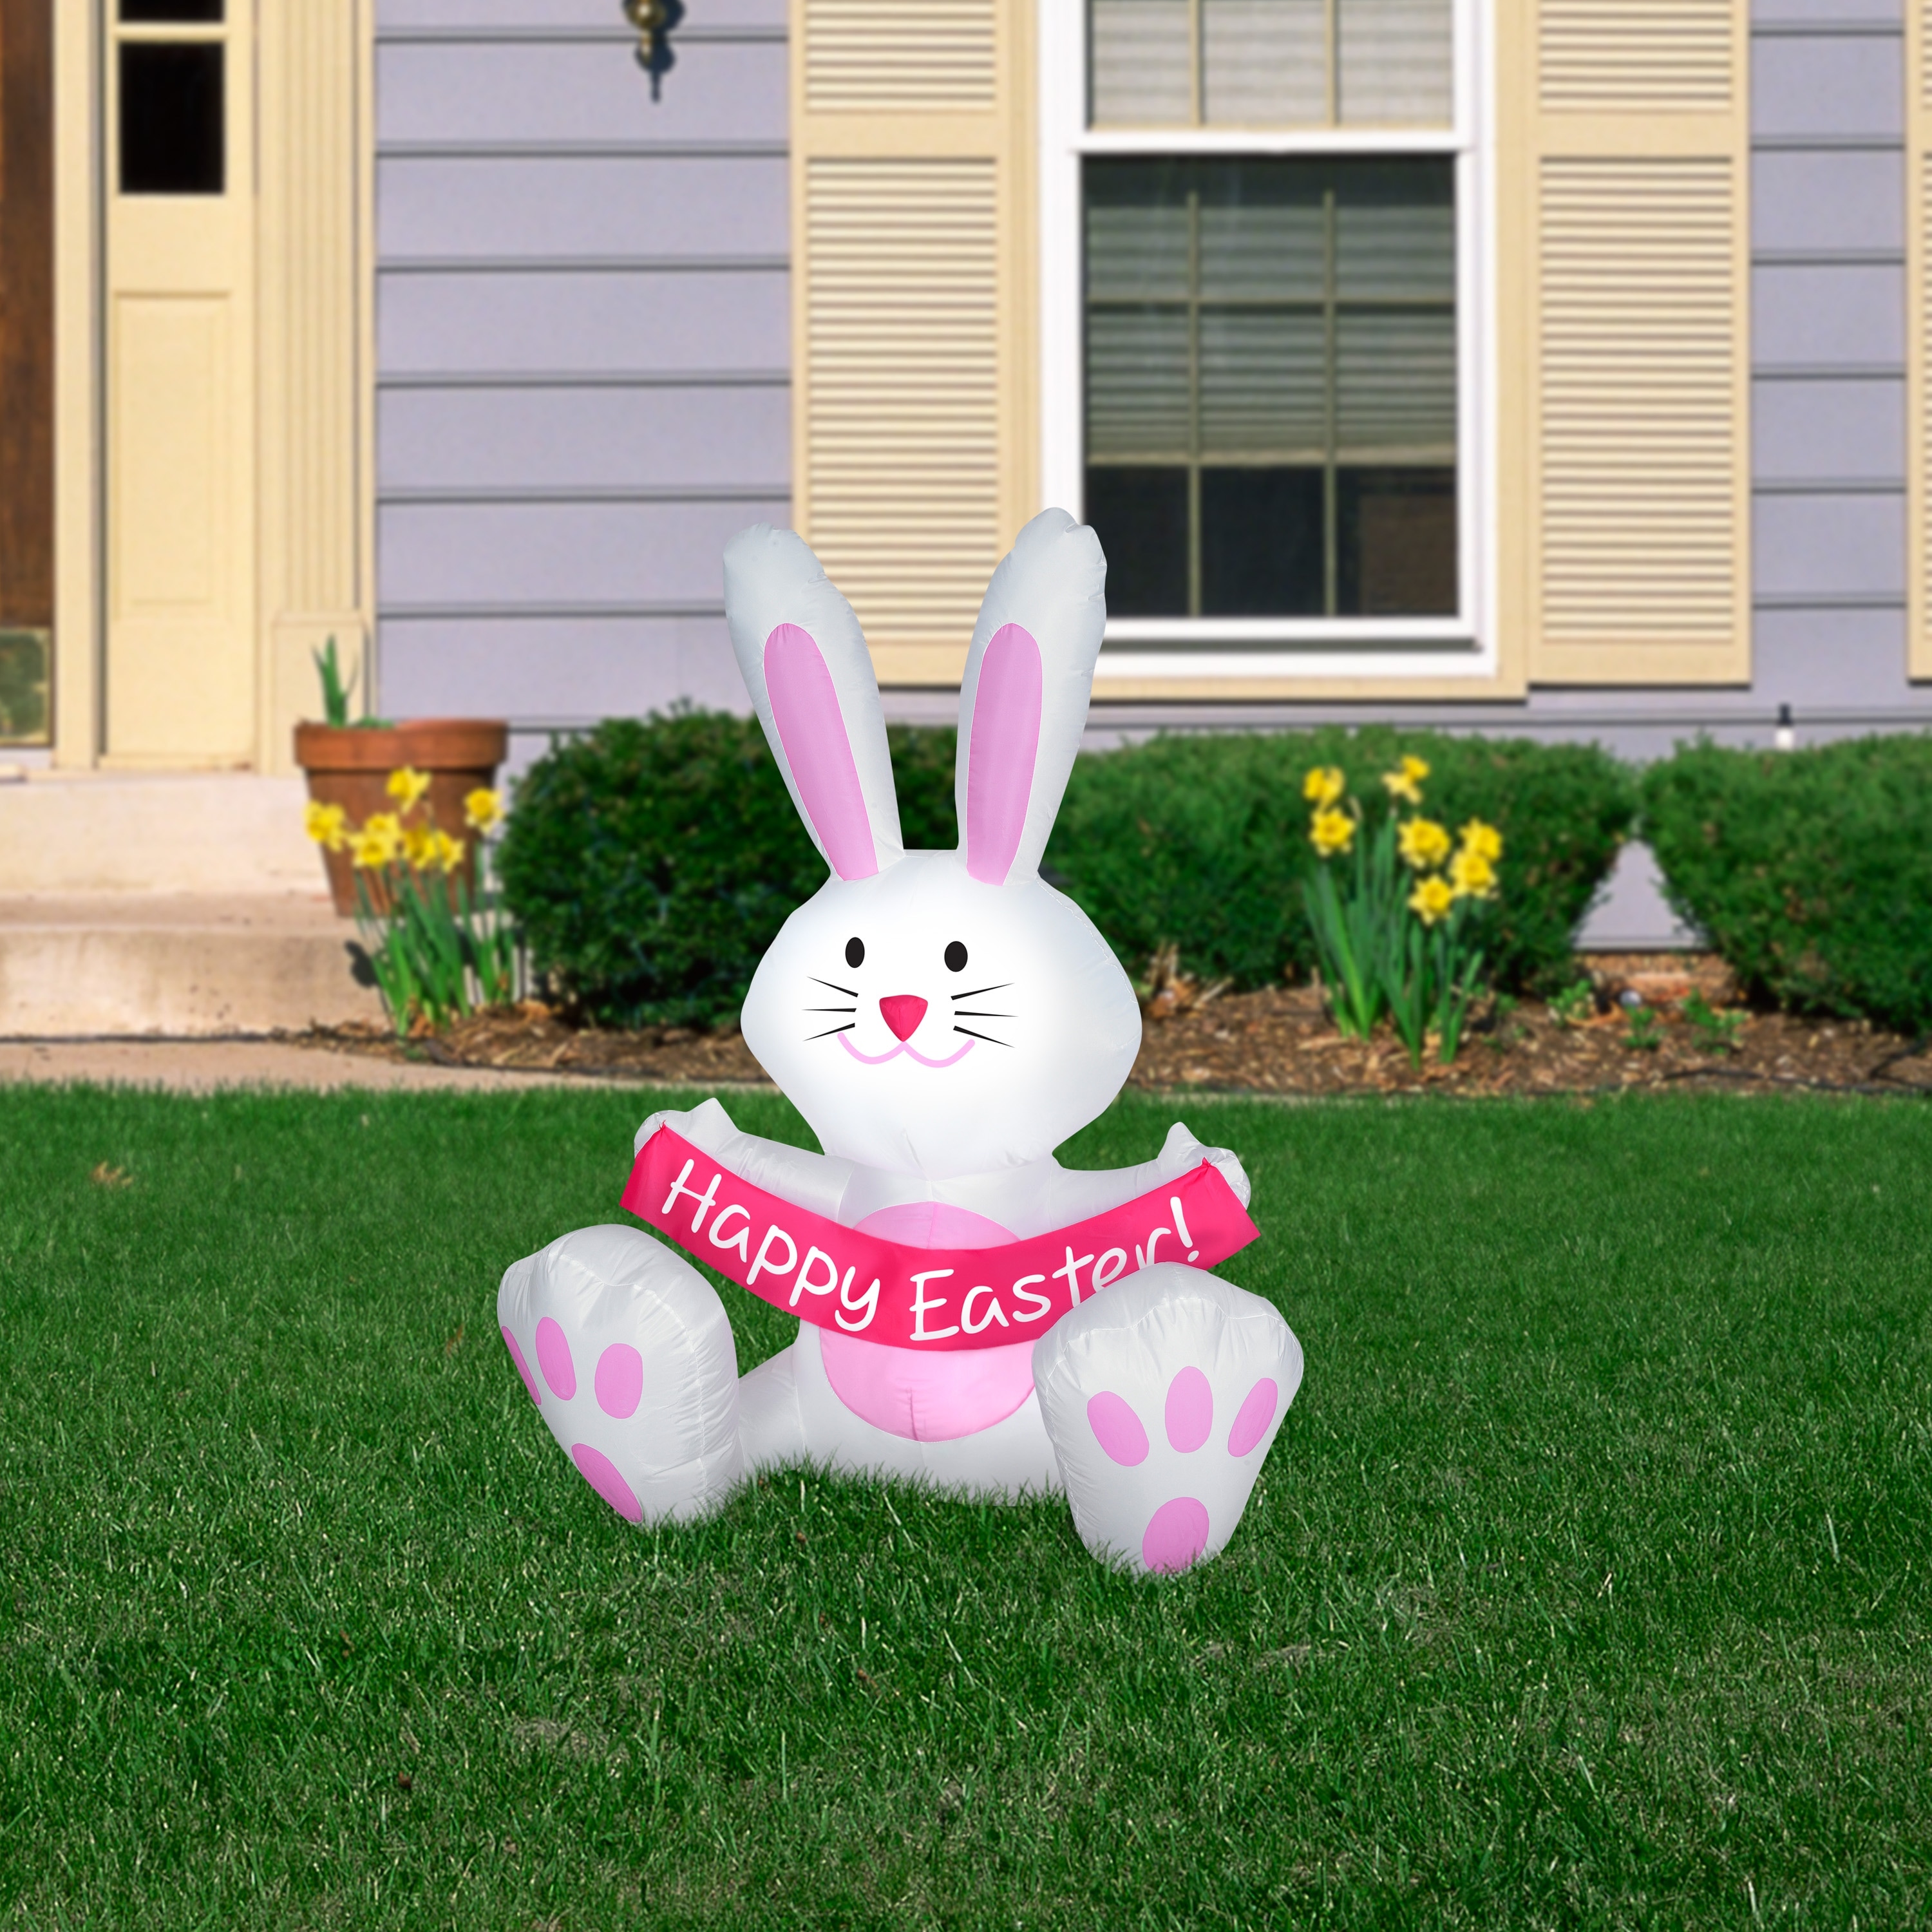 https://ak1.ostkcdn.com/images/products/is/images/direct/ebfc4e3867dcc98a5a89bc6f3abe5f5fc1fe2979/Gemmy-Airblown-Inflatable-Easter-Bunny-with-Happy-Easter-Sign%2C-3.5-ft-Tall%2C-pink.jpg